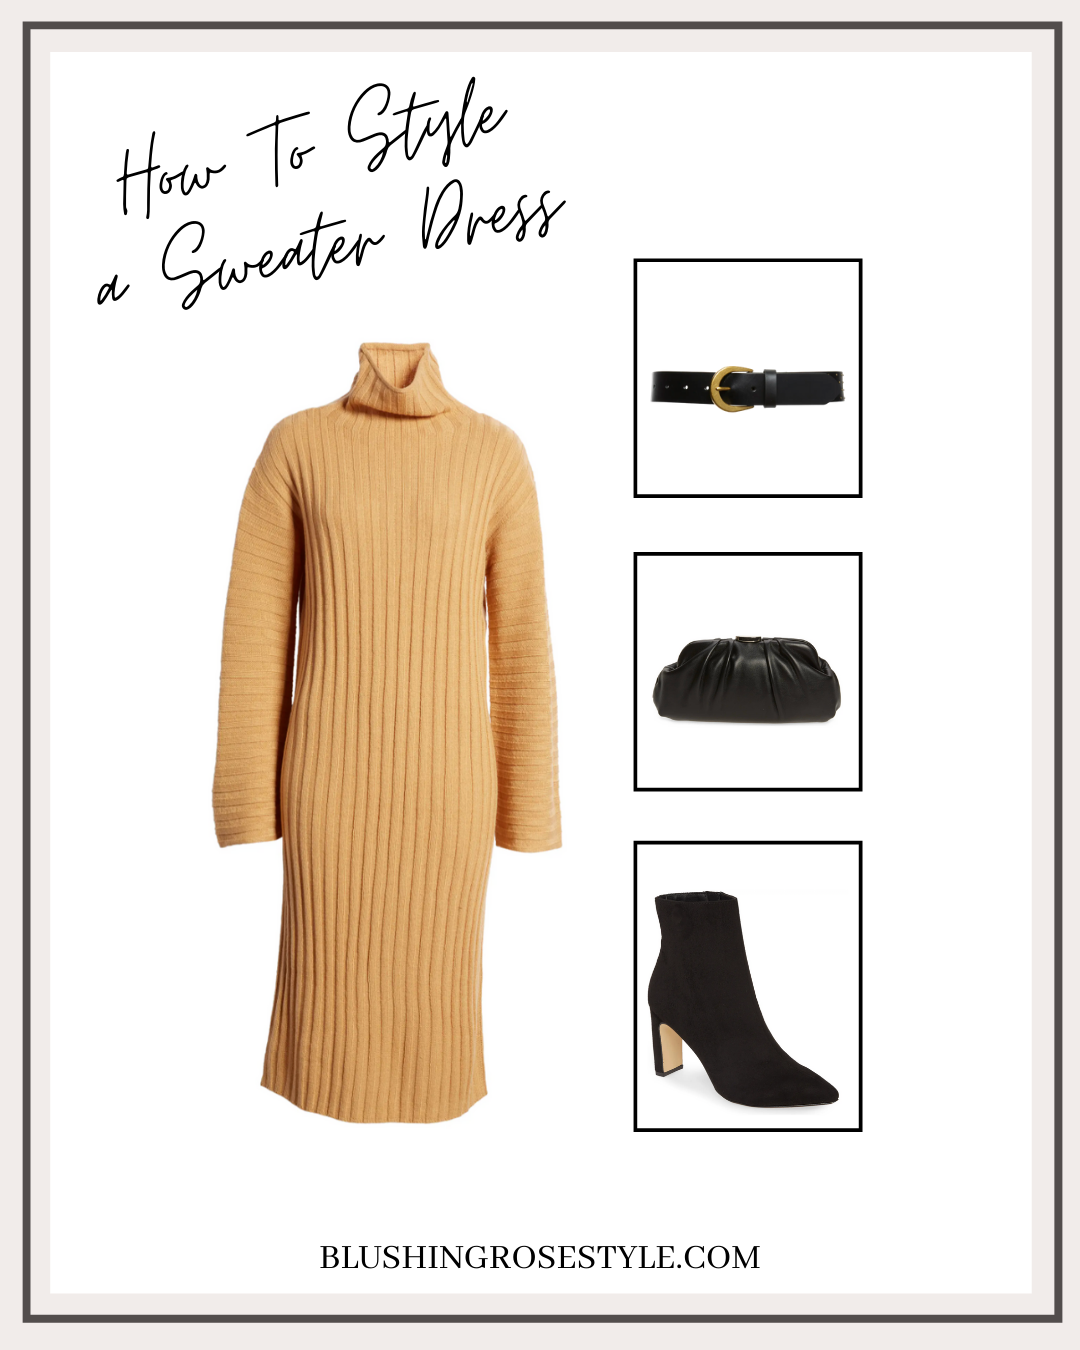 Outfit idea with sweater dress